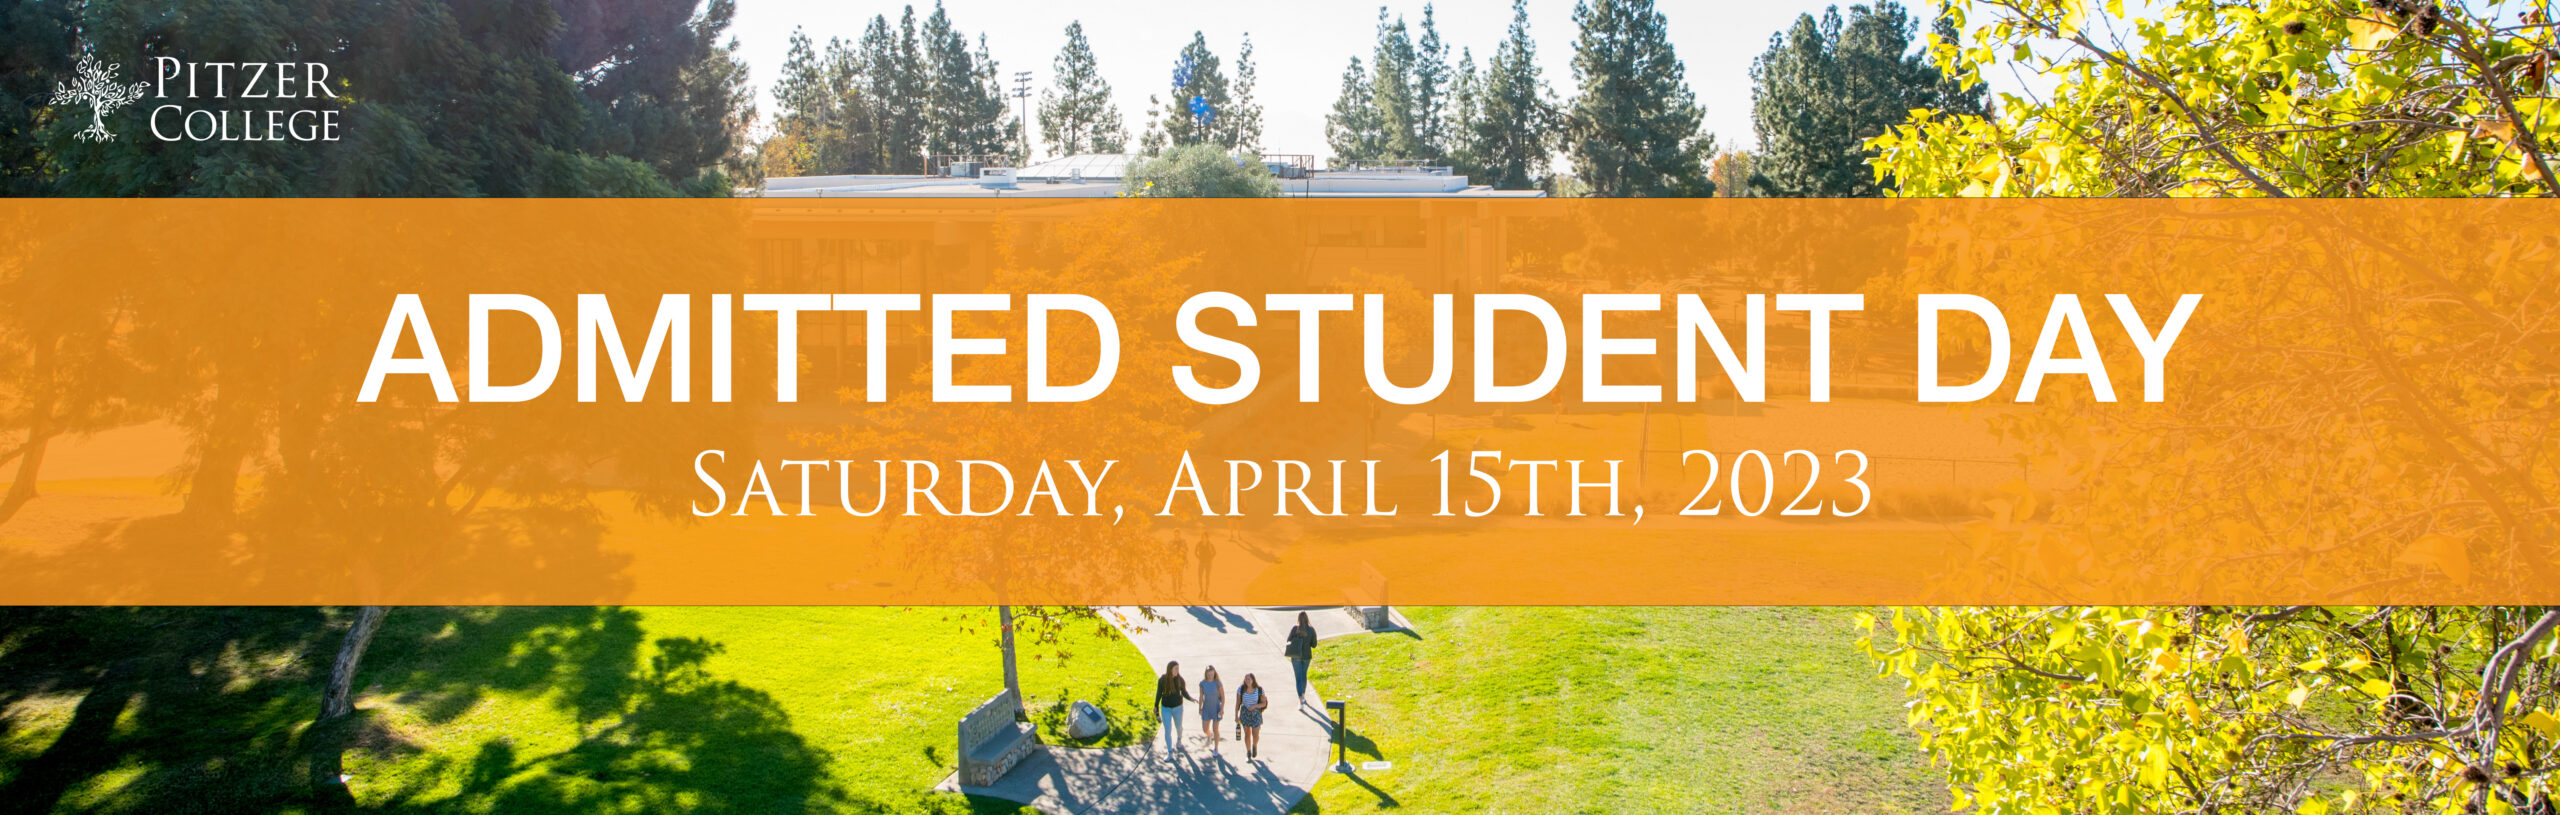 Admitted Student Day 2023 Admission at Pitzer College